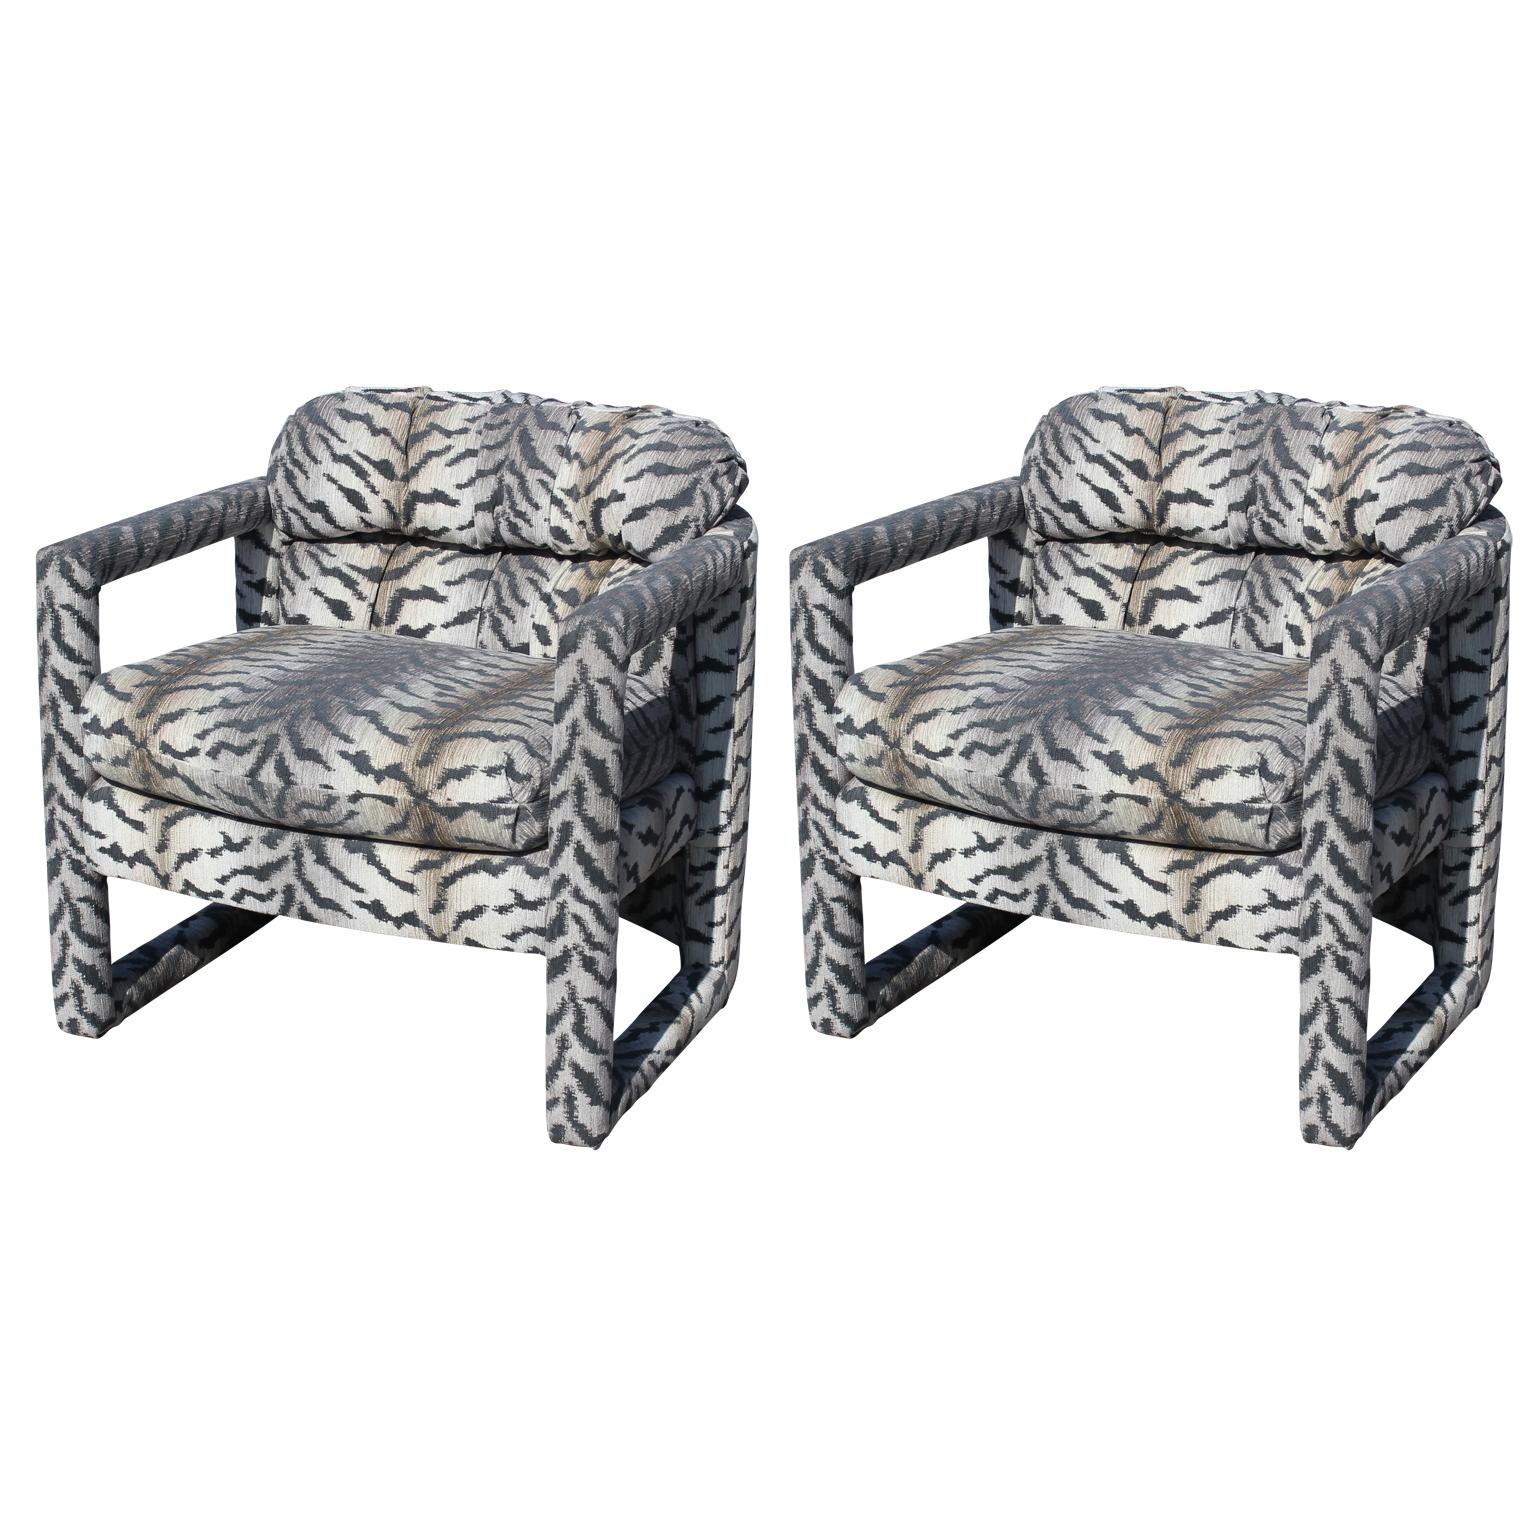 Pair of Modern Barrel Back Parson Style Club Chairs by Drexel in Tiger Print